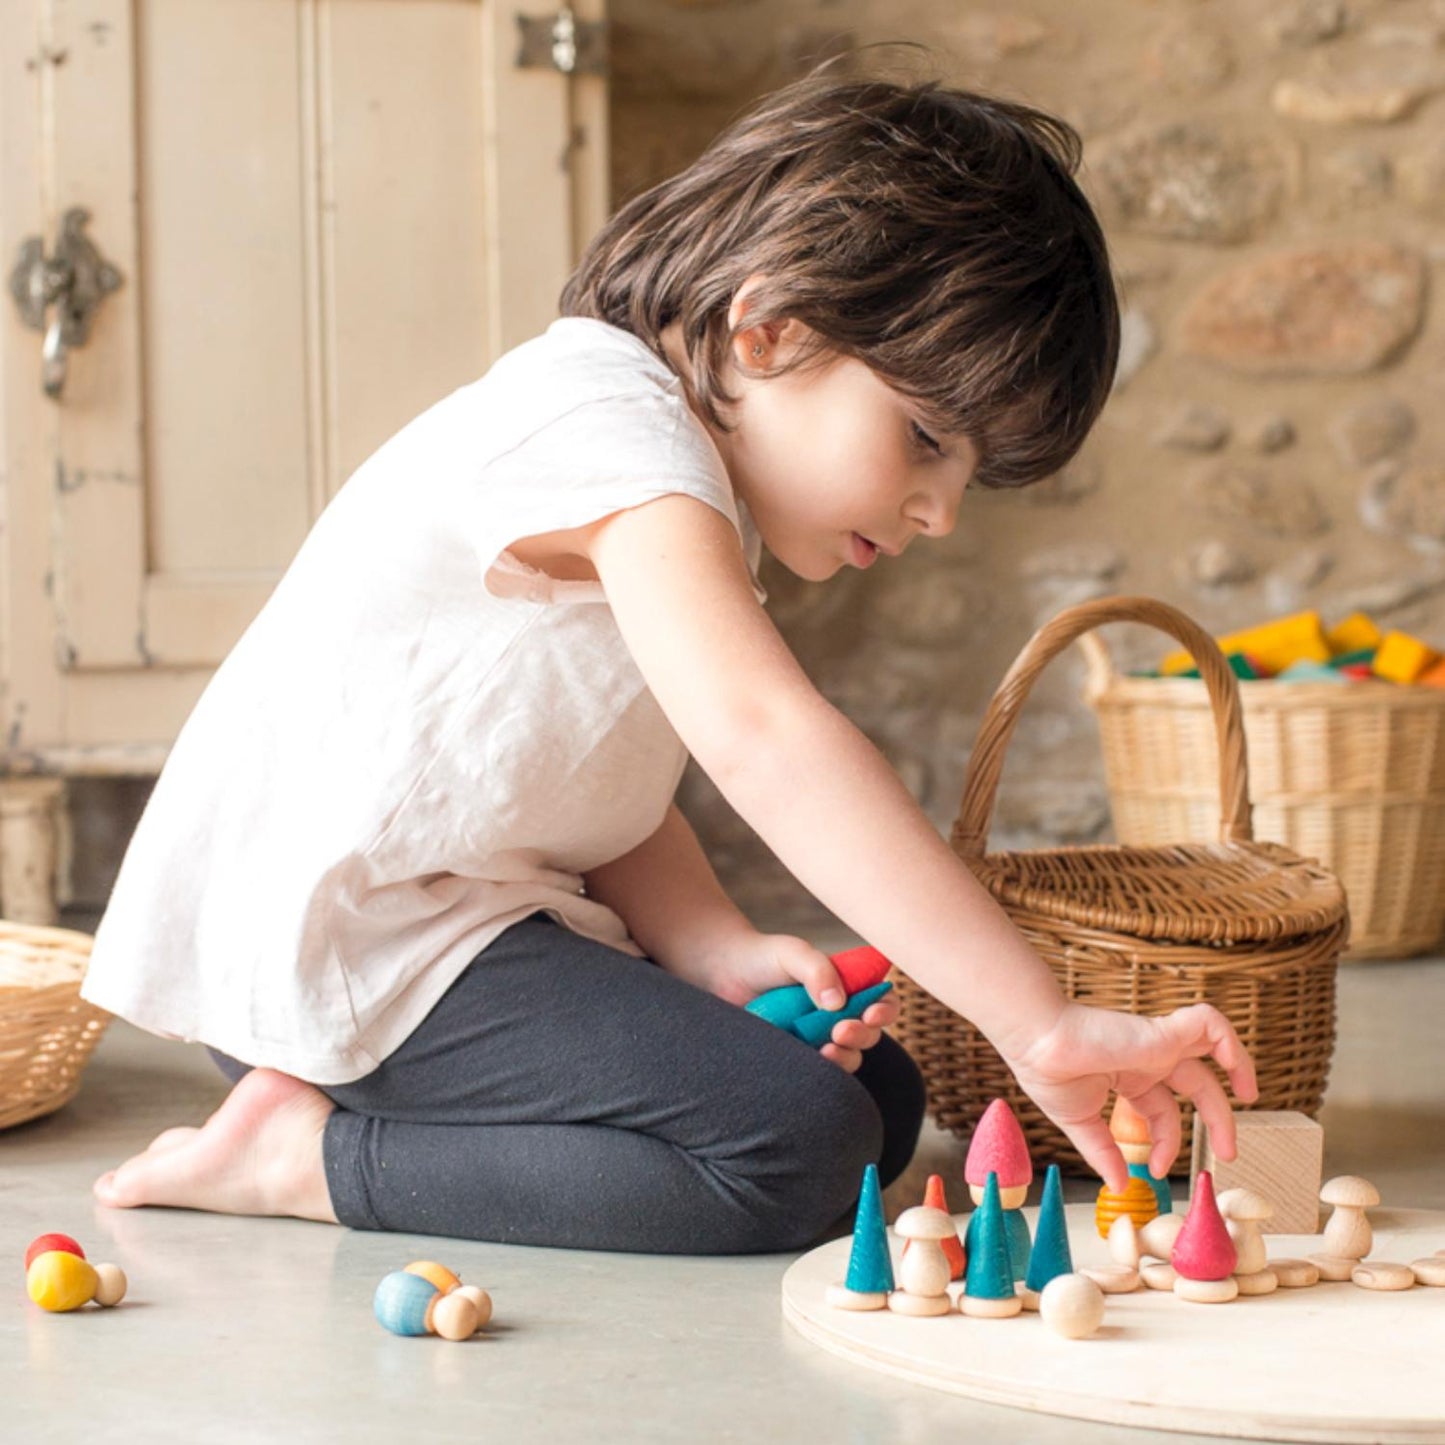 Grapat Nins Tomten | Wooden Toys | Open-Ended Play Set | Lifestyle: Boy Playing with Grapat Nins Tomten on Floor | BeoVERDE.ie